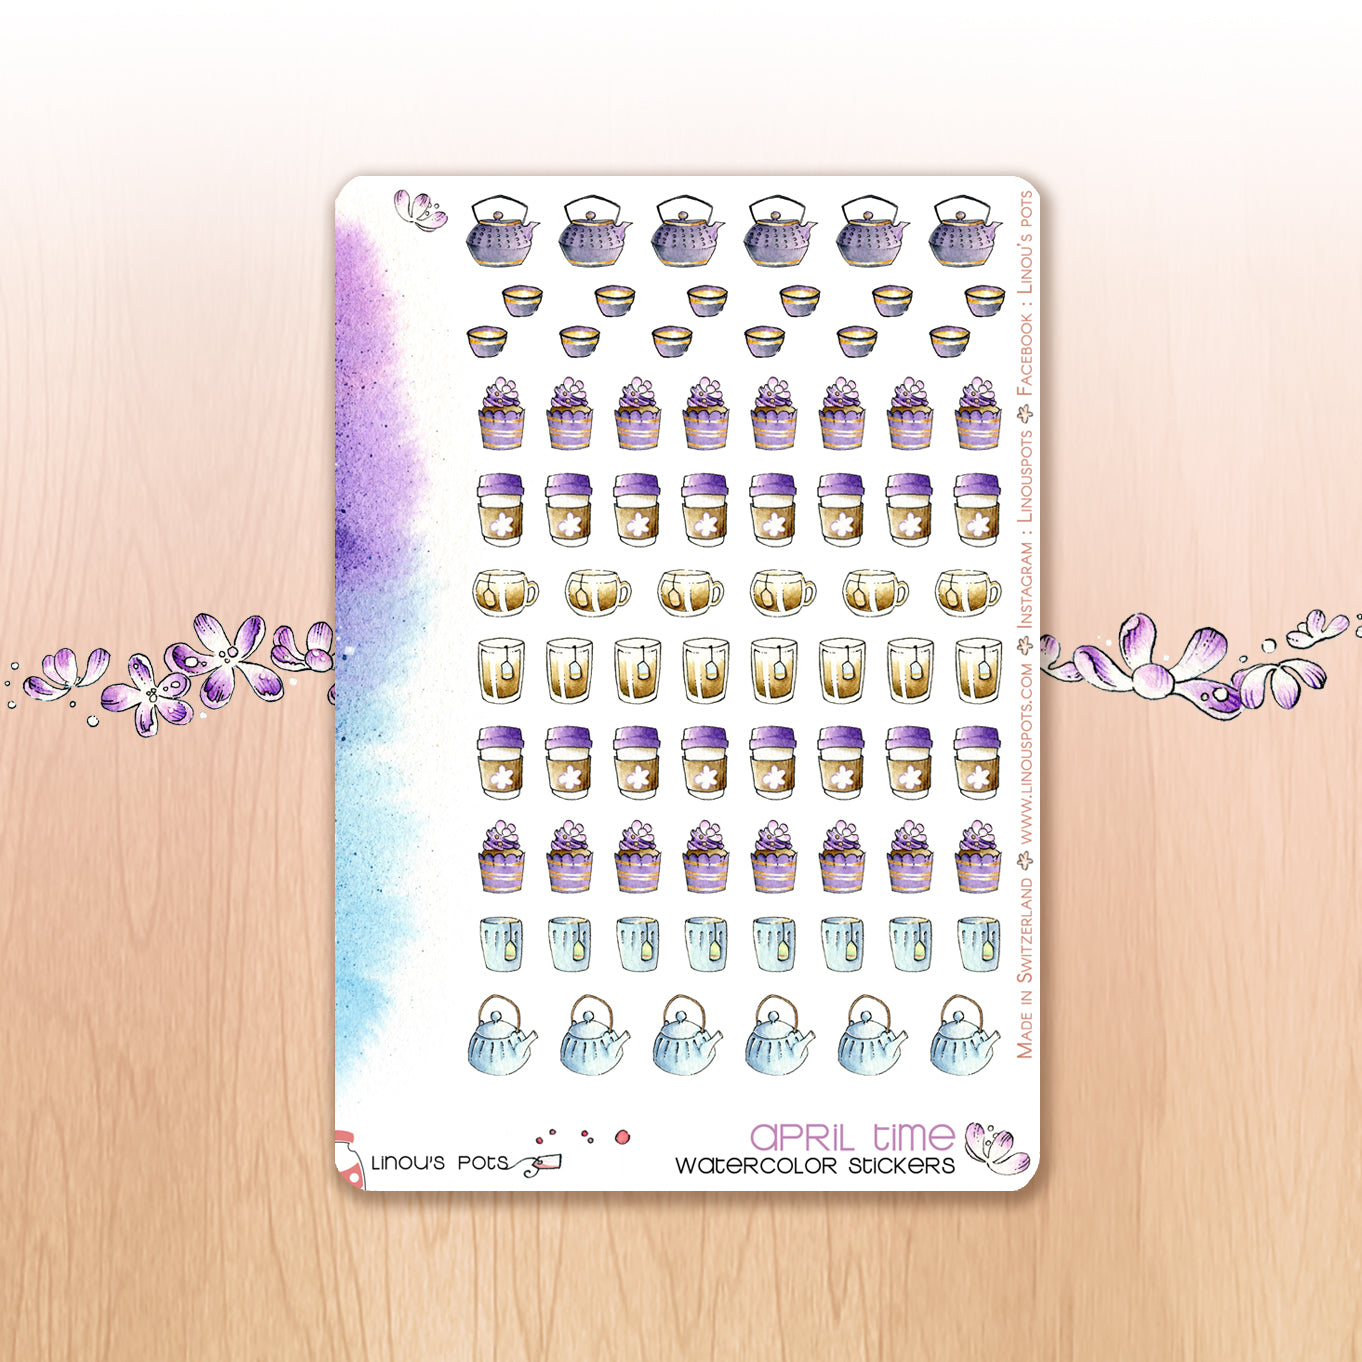 Buzzing In The Rain - Decorative Watercolor Stickers - Hot Beverages